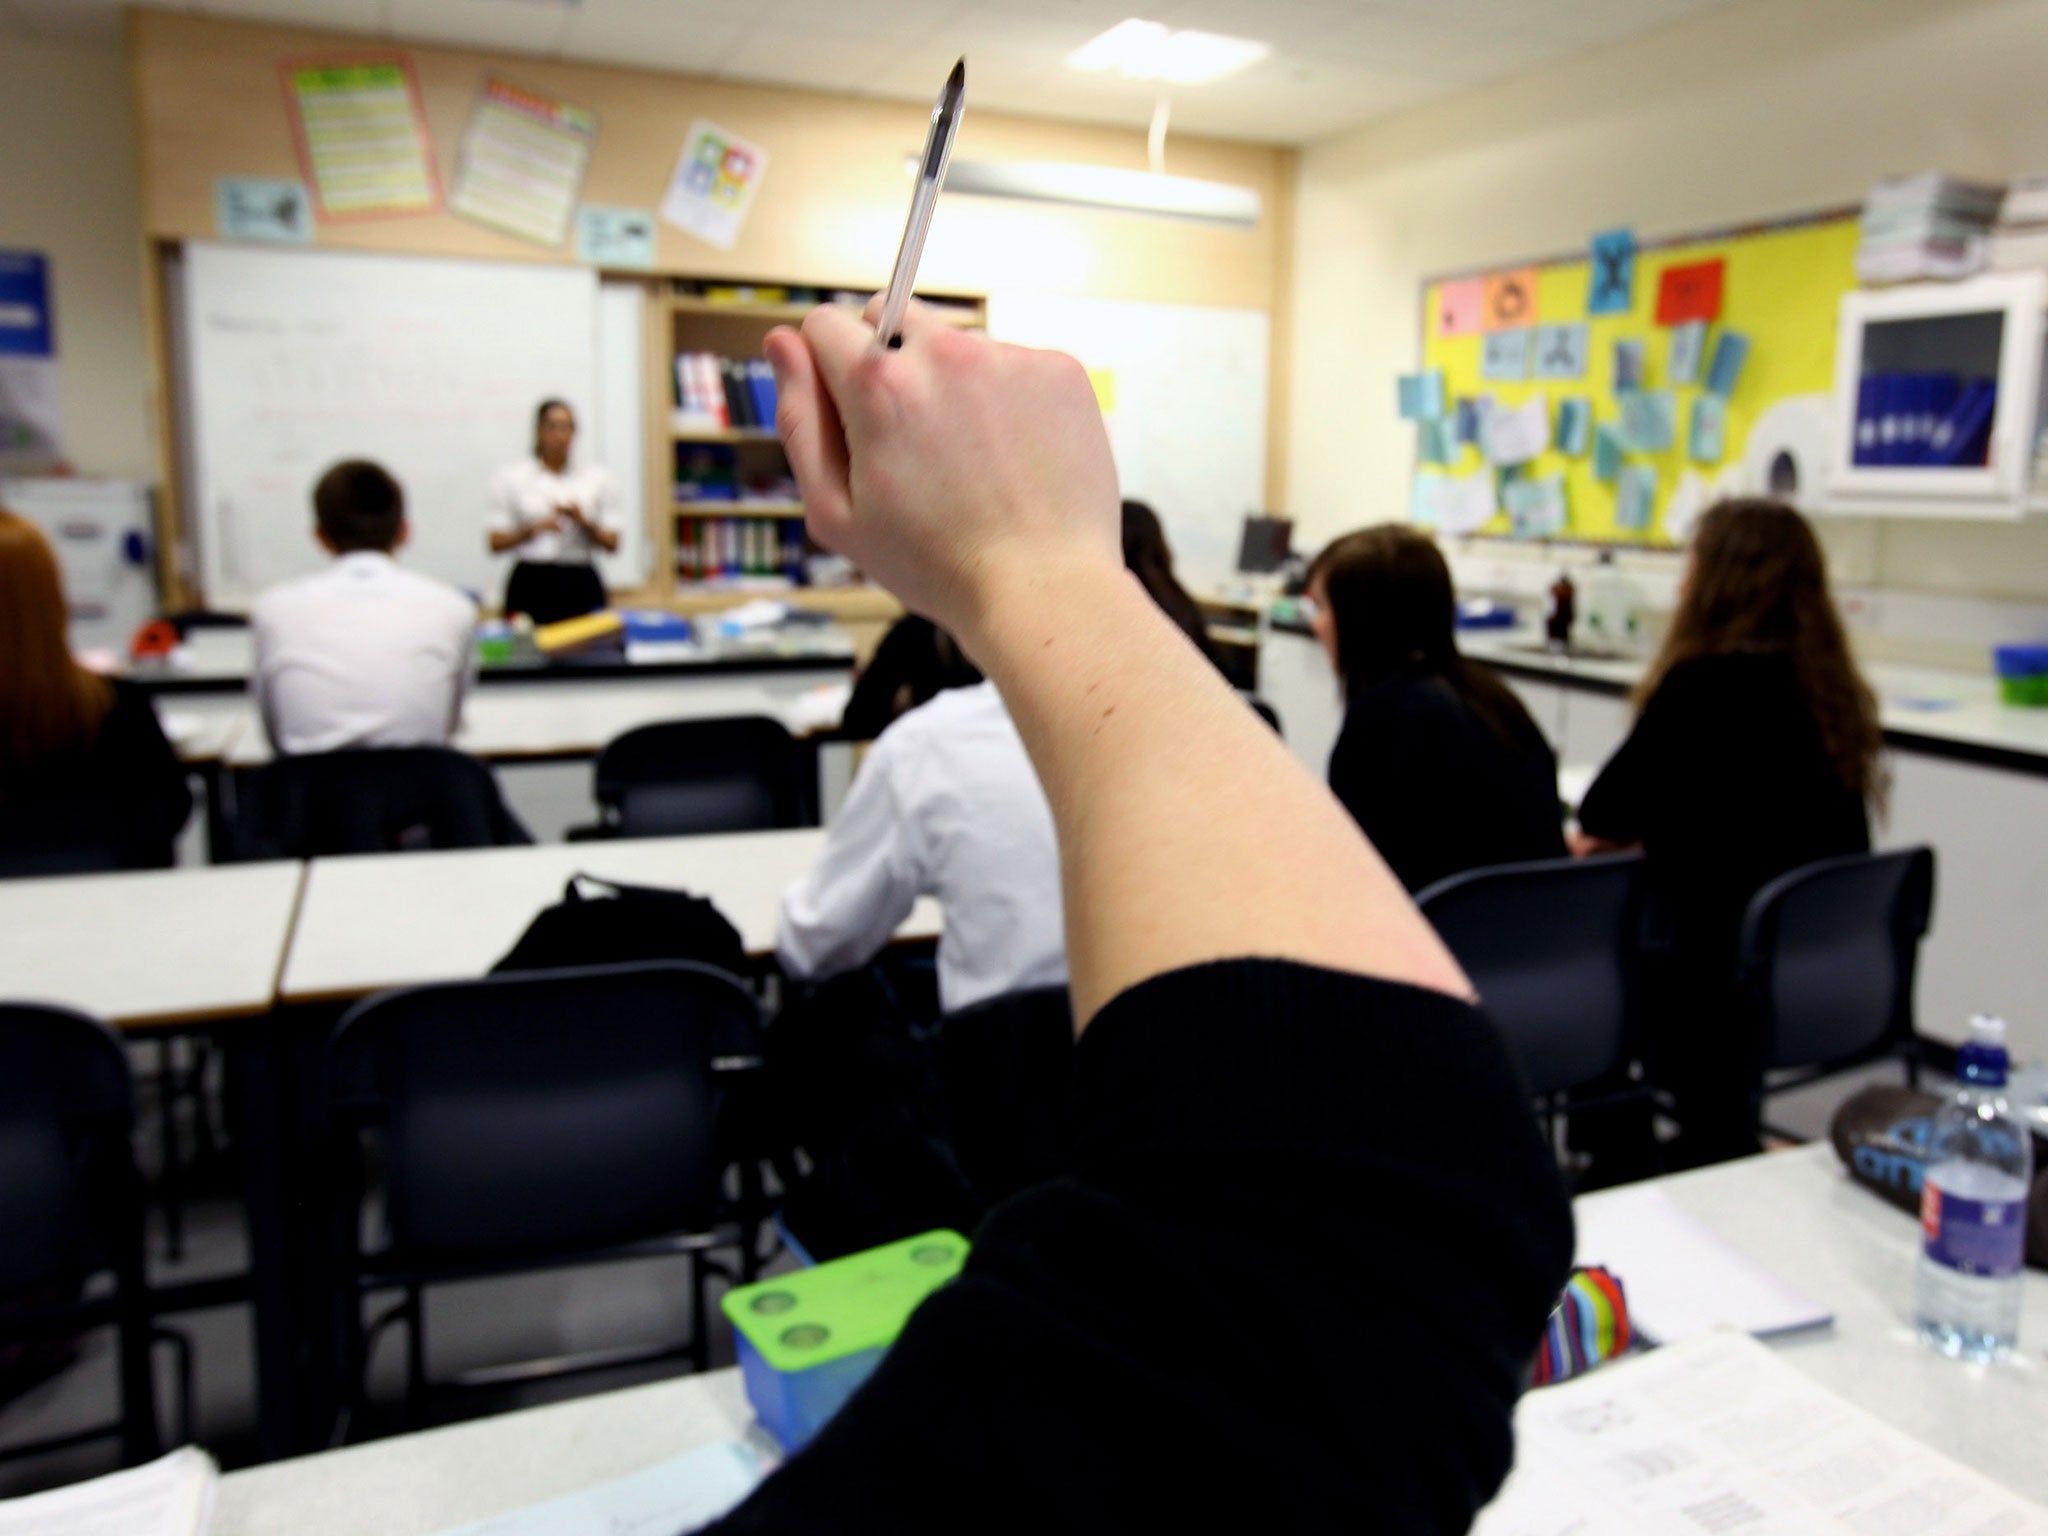 Under new plans from Ofsted schools face double inspections on the same day